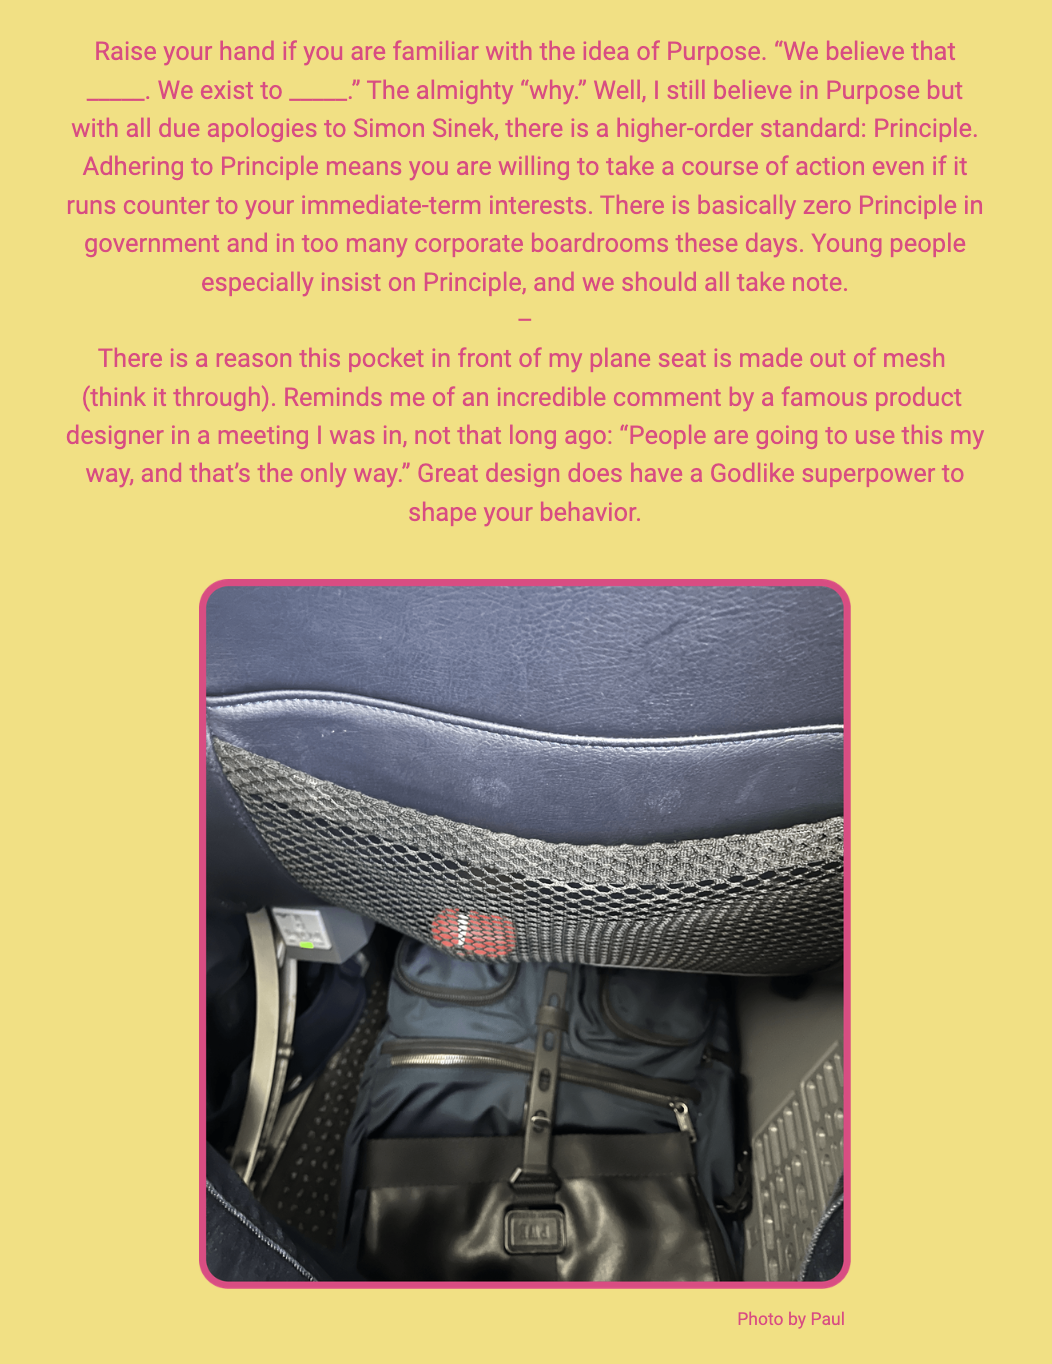 The image shows a passage of text with a background photo of an airplane seat back and a bag stowed under the seat. Here is the alt text including all of the text that appears in the image:

"Text overlaying an image of an airplane seat from a passenger's point of view. The seatback is upholstered in blue with a mesh pocket containing a safety card and what appears to be a personal item with red detail, placed in front of a stowed black bag. The text reads: 'Raise your hand if you are familiar with the idea of Purpose. “We believe that _____. We exist to _____.” The almighty “why.” Well, I still believe in Purpose but with all due apologies to Simon Sinek, there is a higher-order standard: Principle. Adhering to Principle means you are willing to take a course of action even if it runs counter to your immediate-term interests. There is basically zero Principle in government and in too many corporate boardrooms these days. Young people especially insist on Principle, and we should all take note. — There is a reason this pocket in front of my plane seat is made out of mesh (think it through). Reminds me of an incredible comment by a famous product designer in a meeting I was in, not that long ago: “People are going to use this my way, and that’s the only way.” Great design does have a Godlike superpower to shape your behavior.' At the bottom right, it states 'Photo by Paul'."